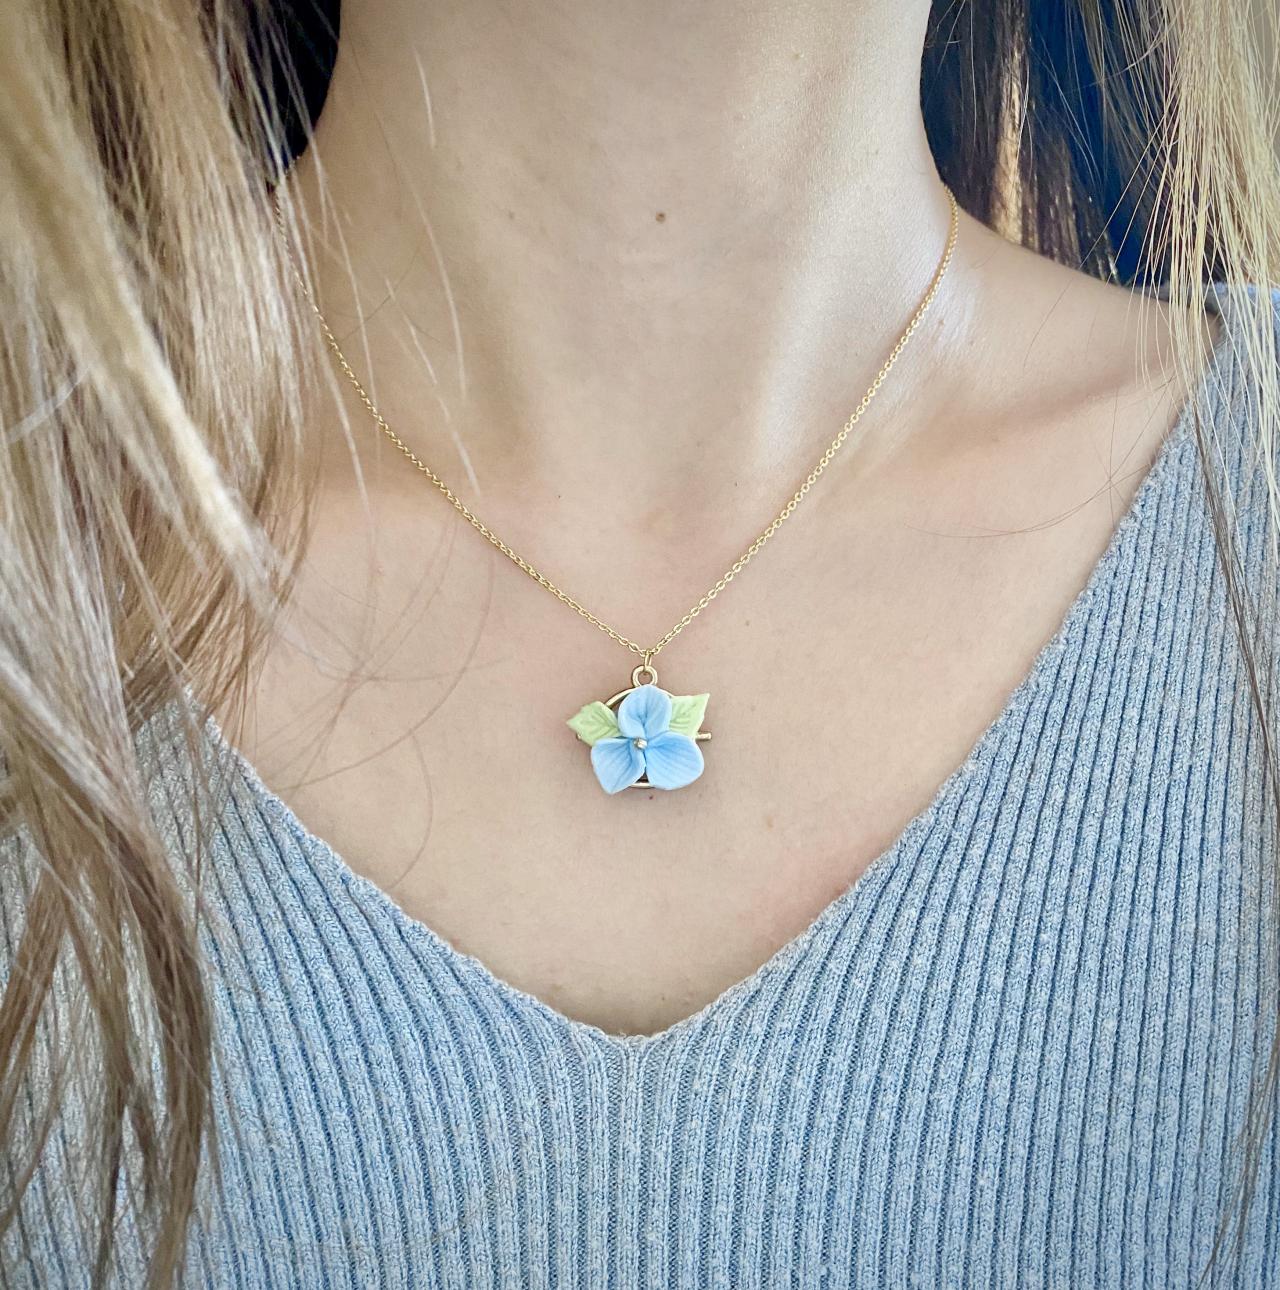 Blue Flower Dainty Necklace / Polymer Clay / 18k Gold Plated